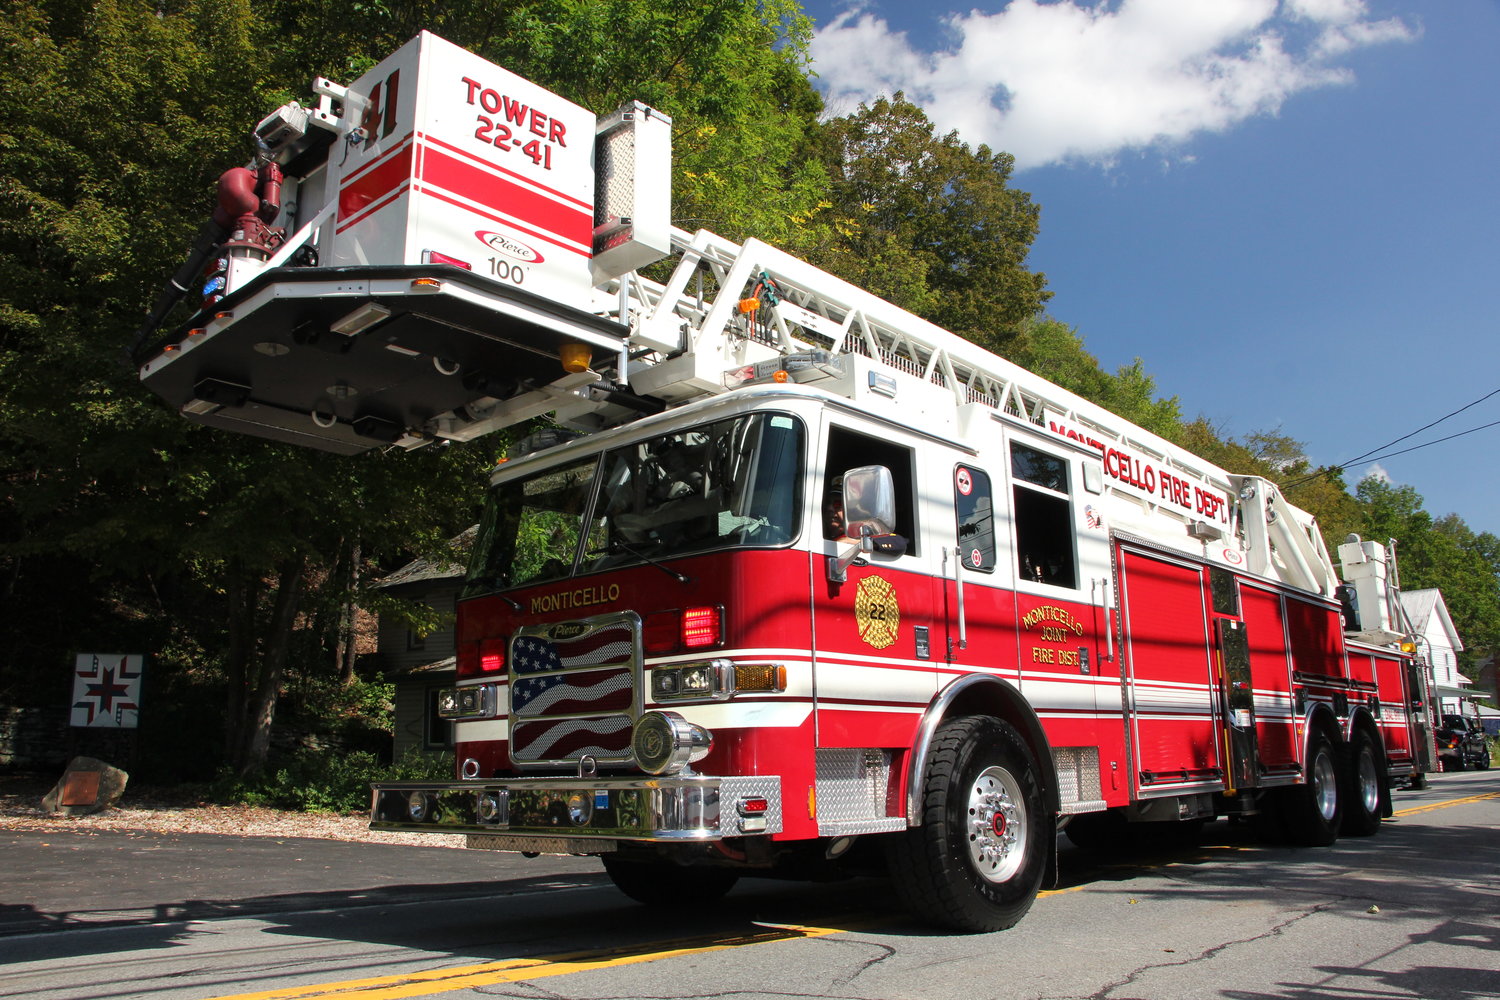 Monticello Fire Department’s ladder truck is a striking piece of equipment.